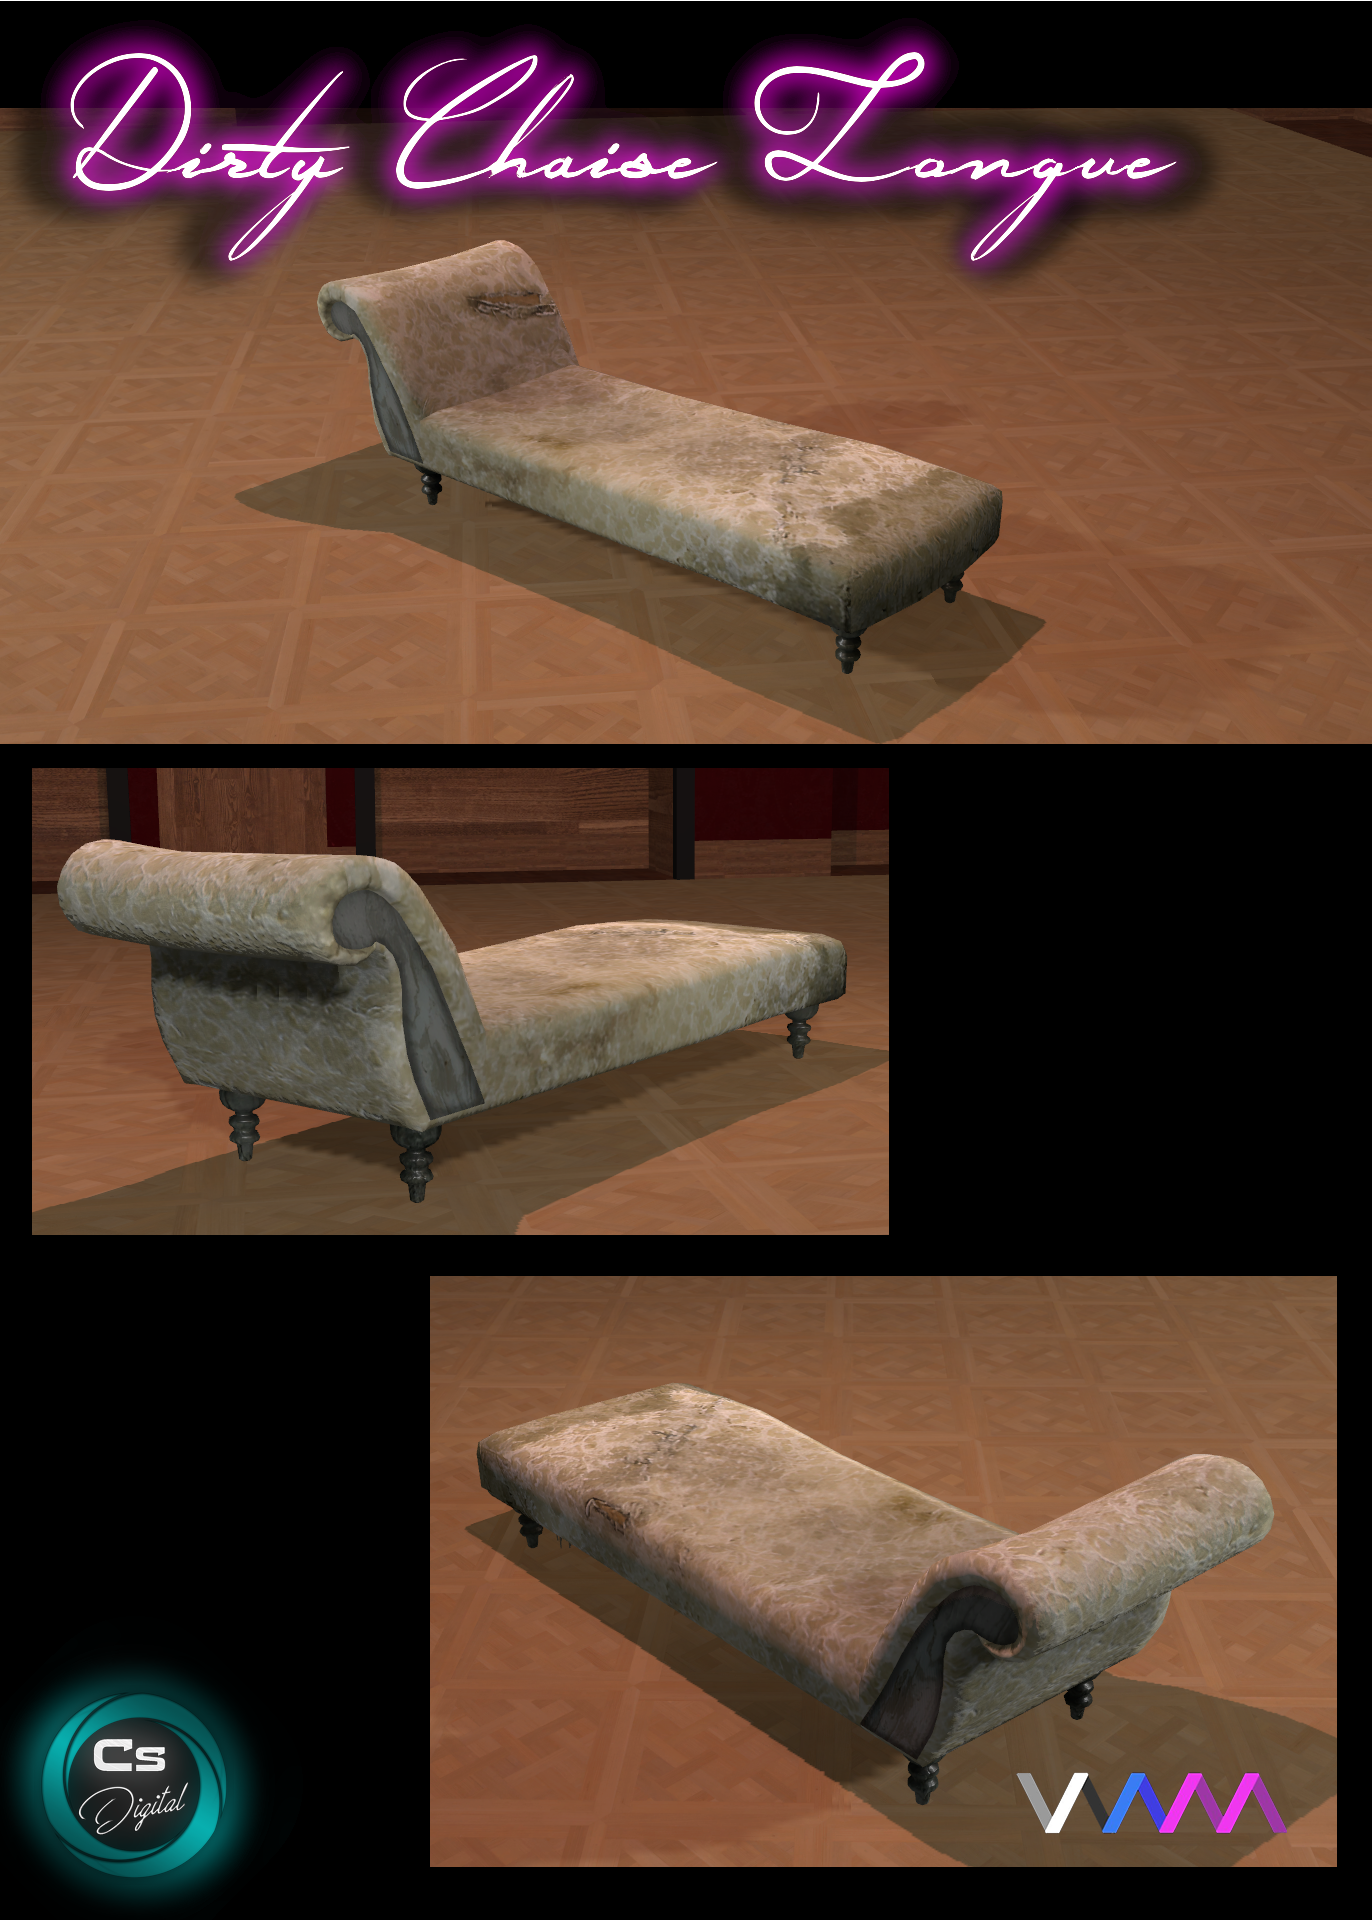 Virt a mate chaise longue dirty.png